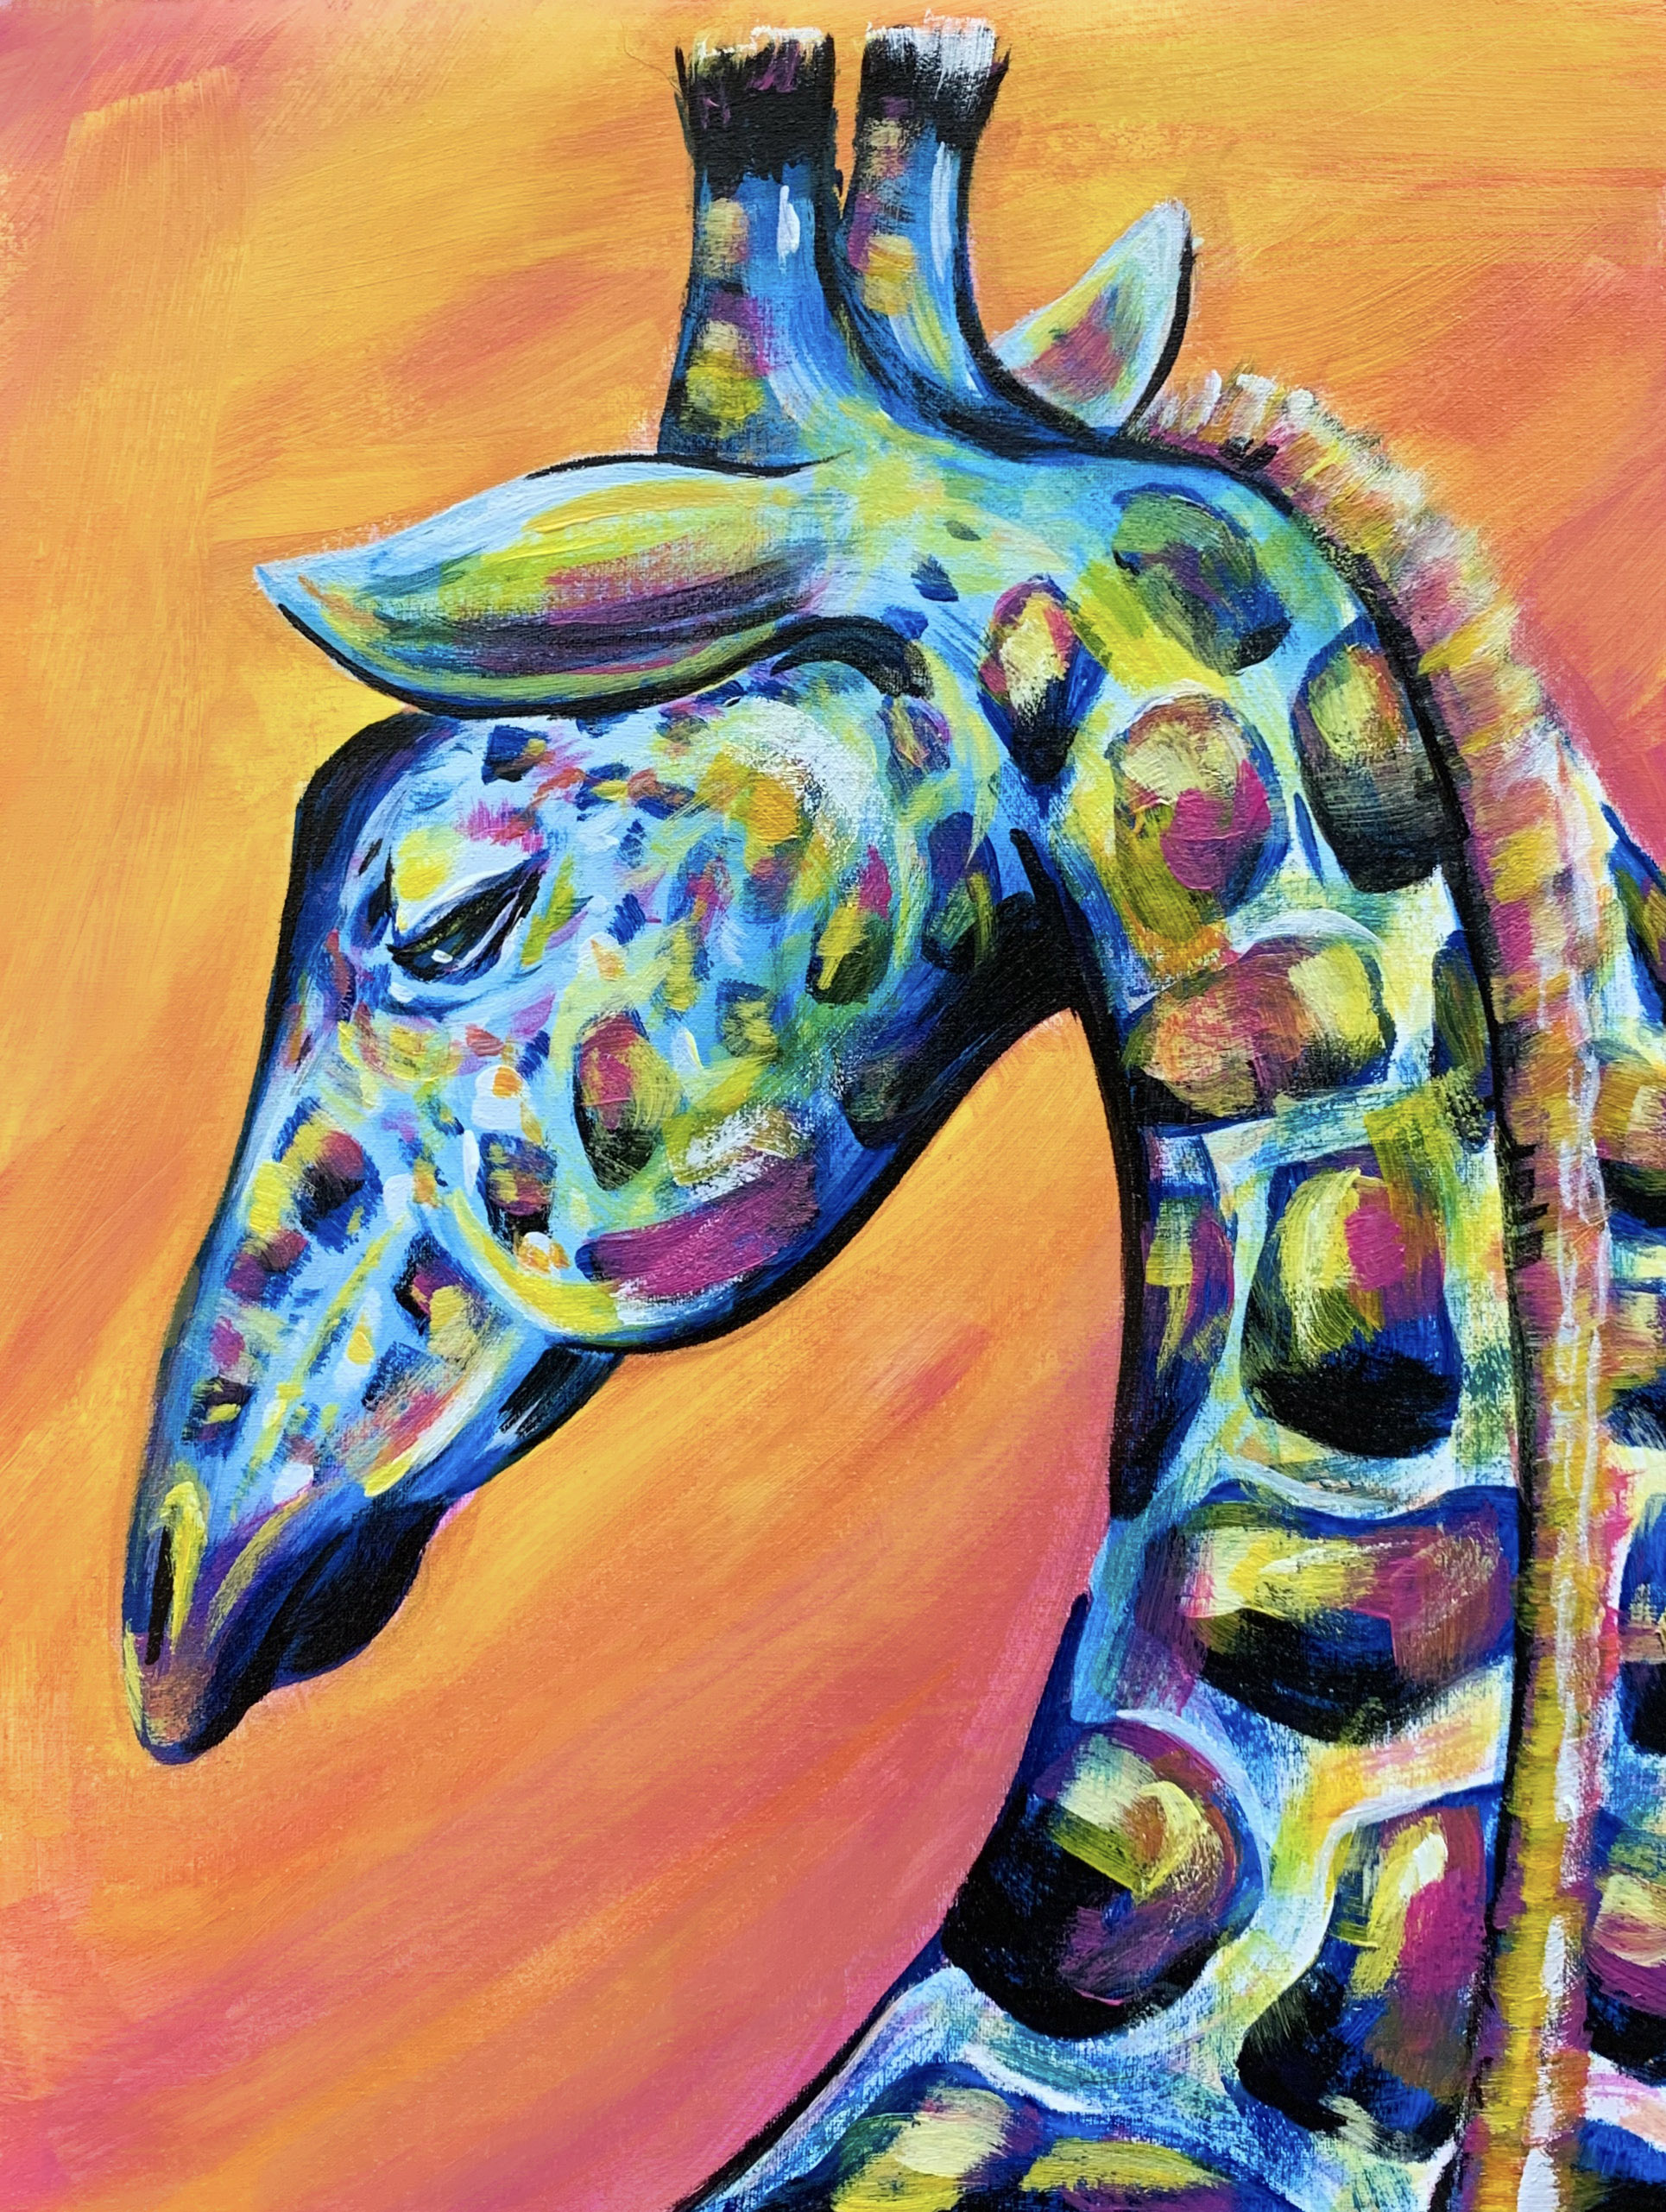 A Vibrant Giraffe experience project by Yaymaker